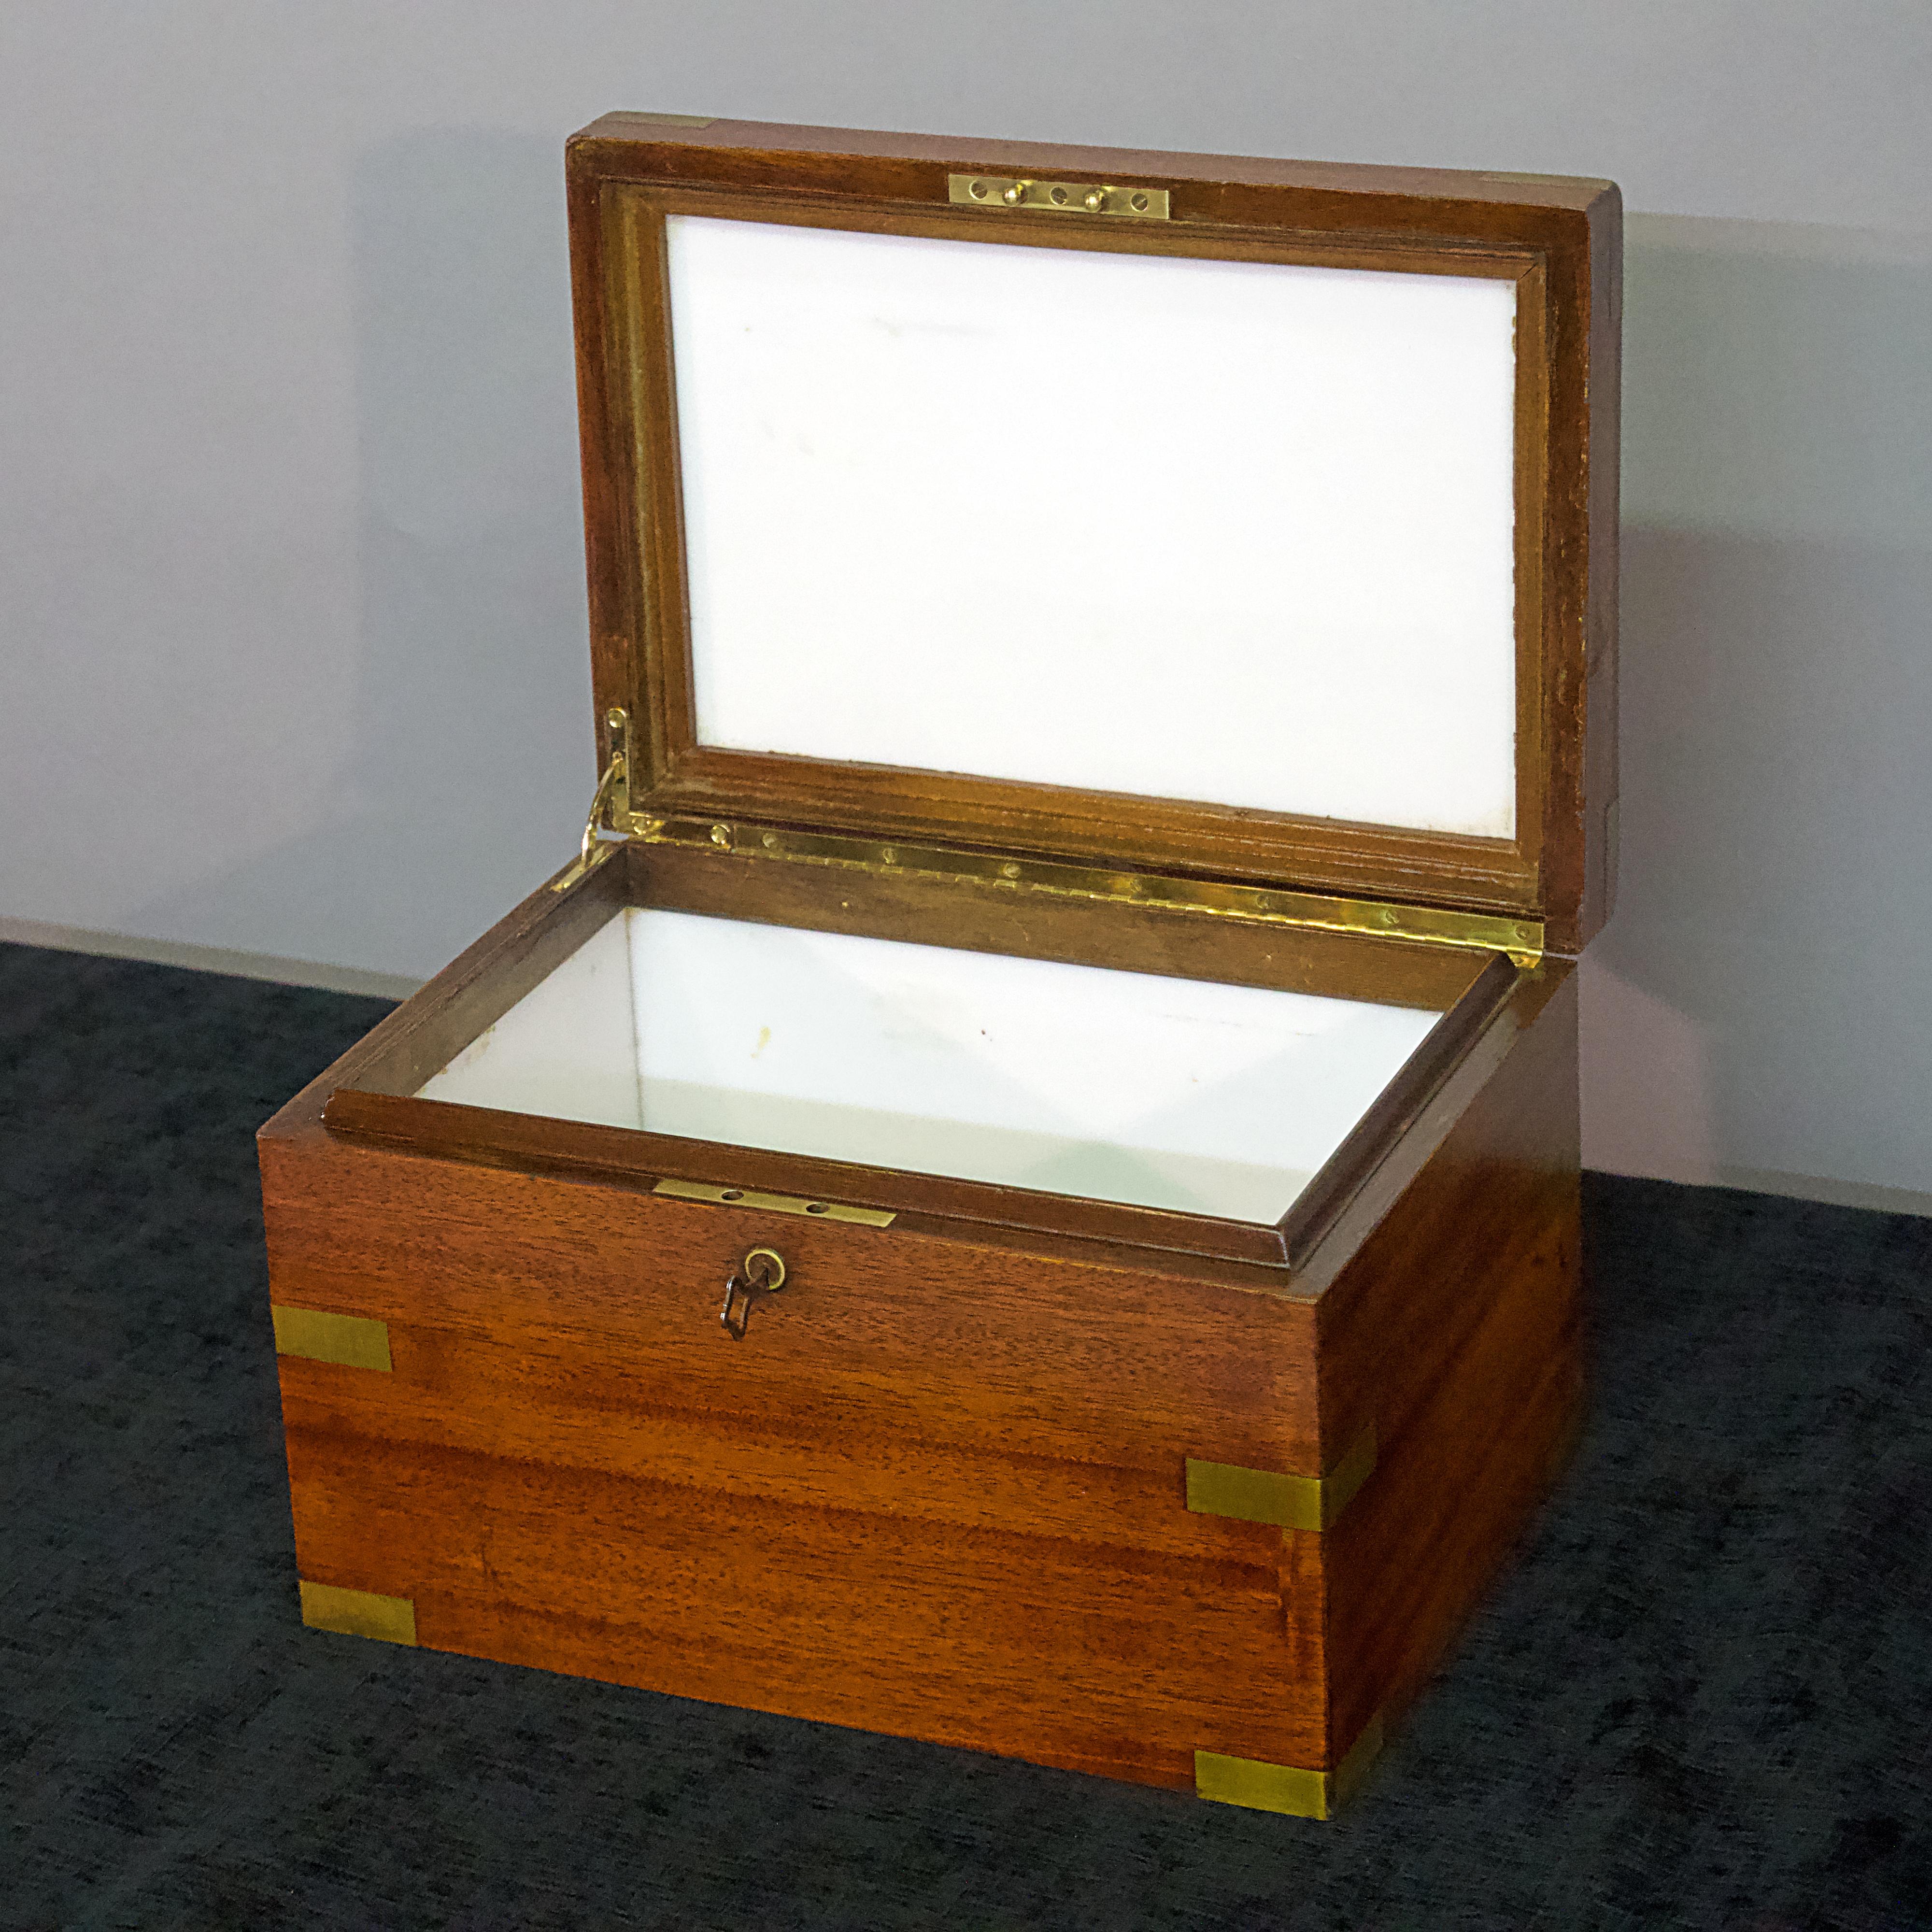 Polished Late 19th Century Humidor For Sale